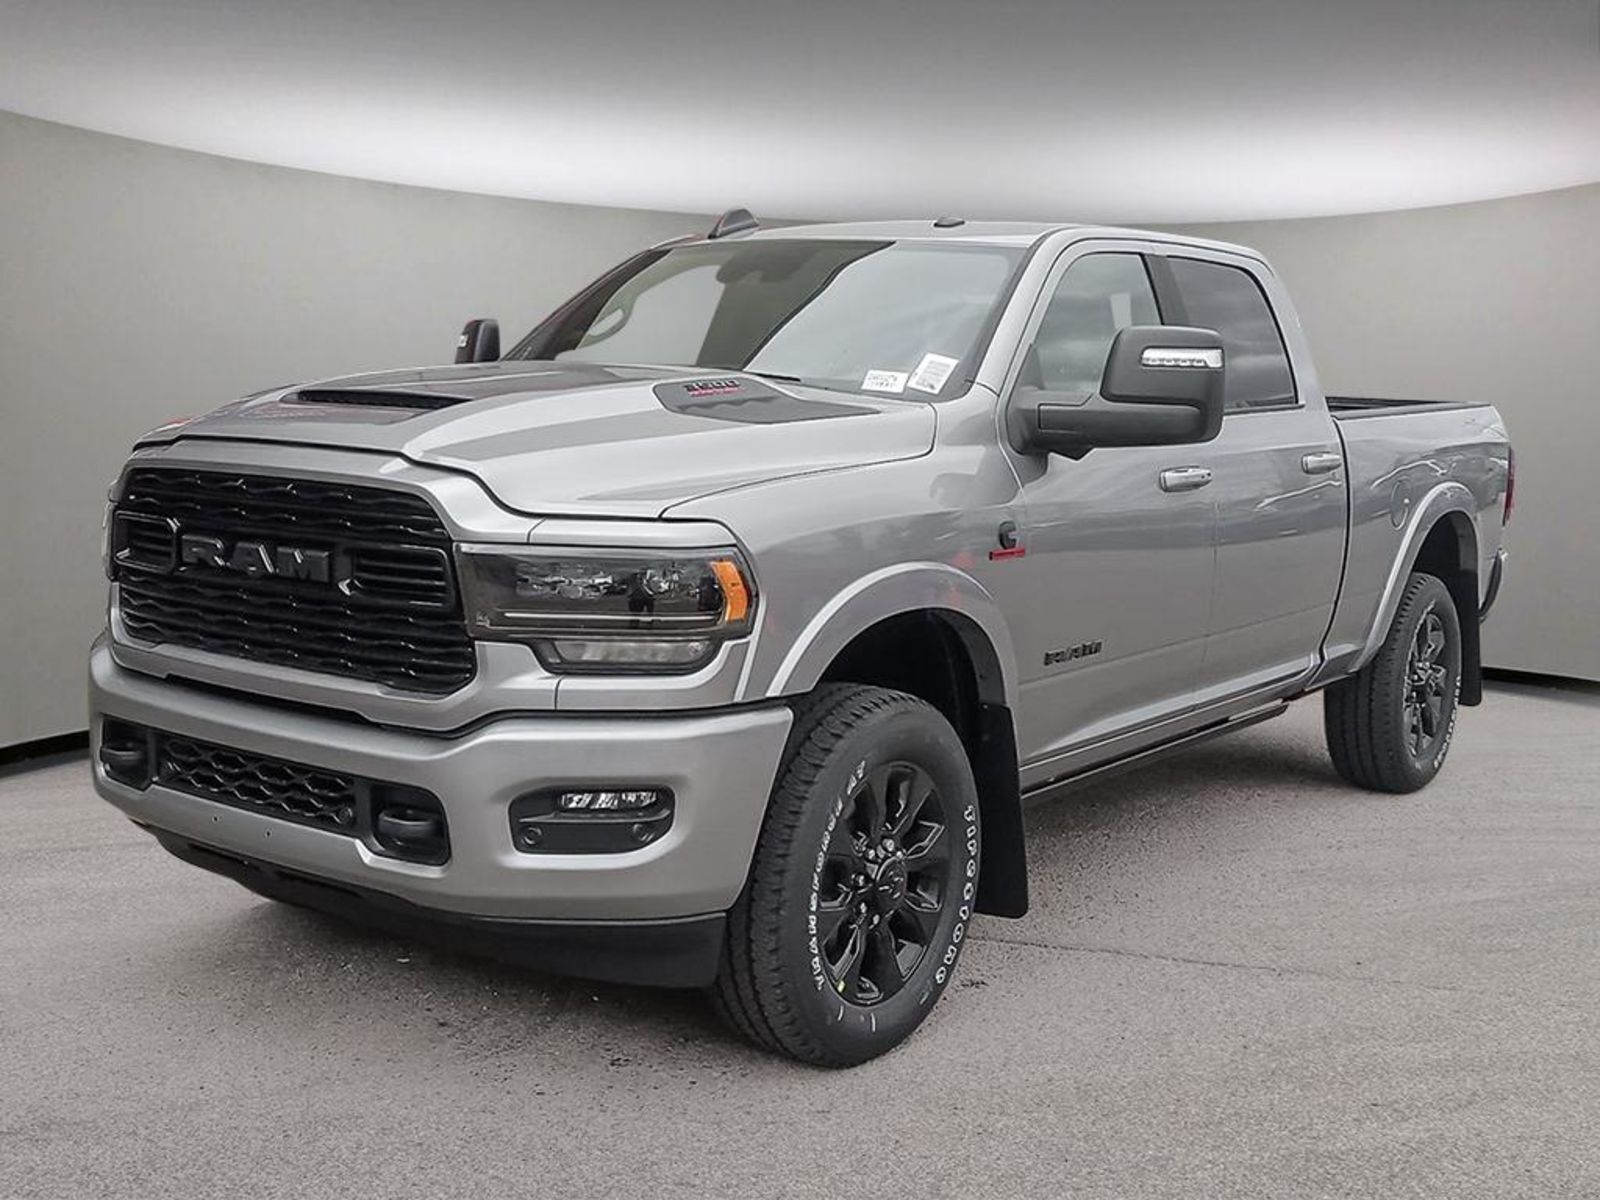 2024 Ram 3500 LIMITED NIGHT EDITION IN BILLET SILVER EQUIPPED WI